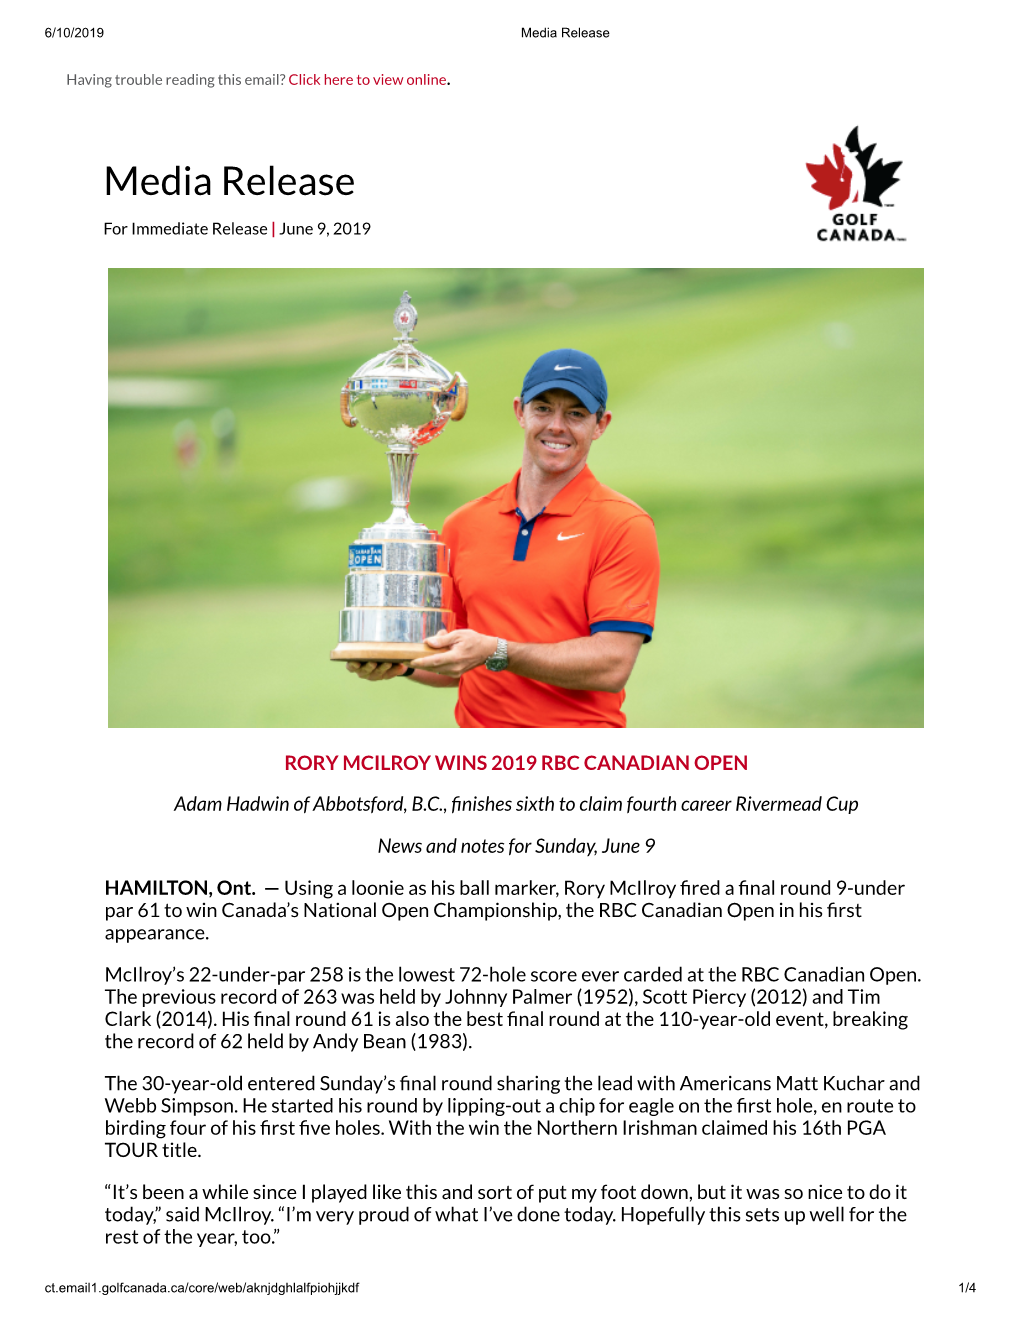 Rory Mcilroy Wins 2019 Rbc Canadian Open